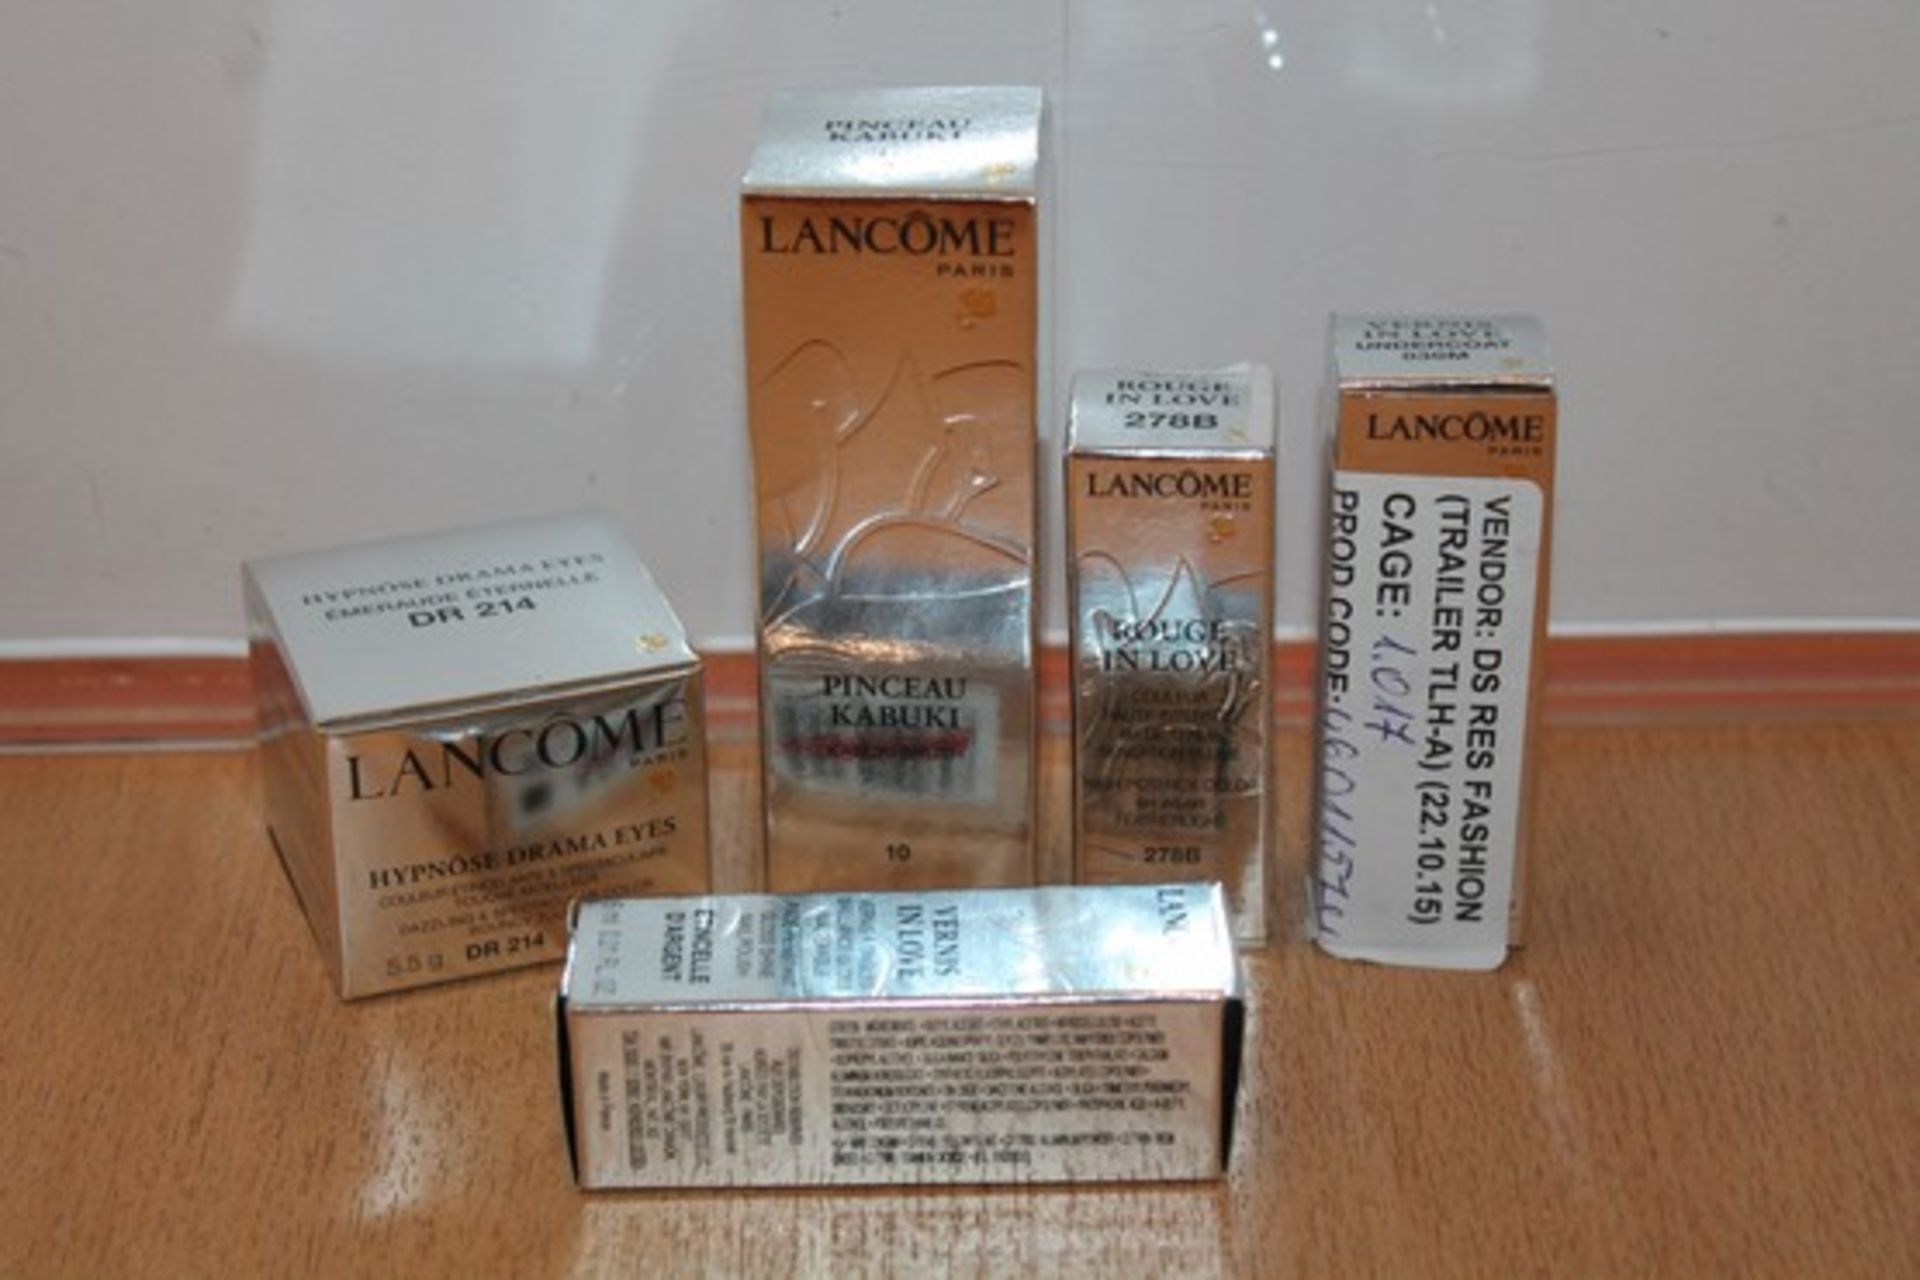 5X BOXED BRAND NEW LANCOME PARIS LADIES MAKE UP ITEMS TO INCLUDE LIPSTICK, EYELINER, EYE SHADOW